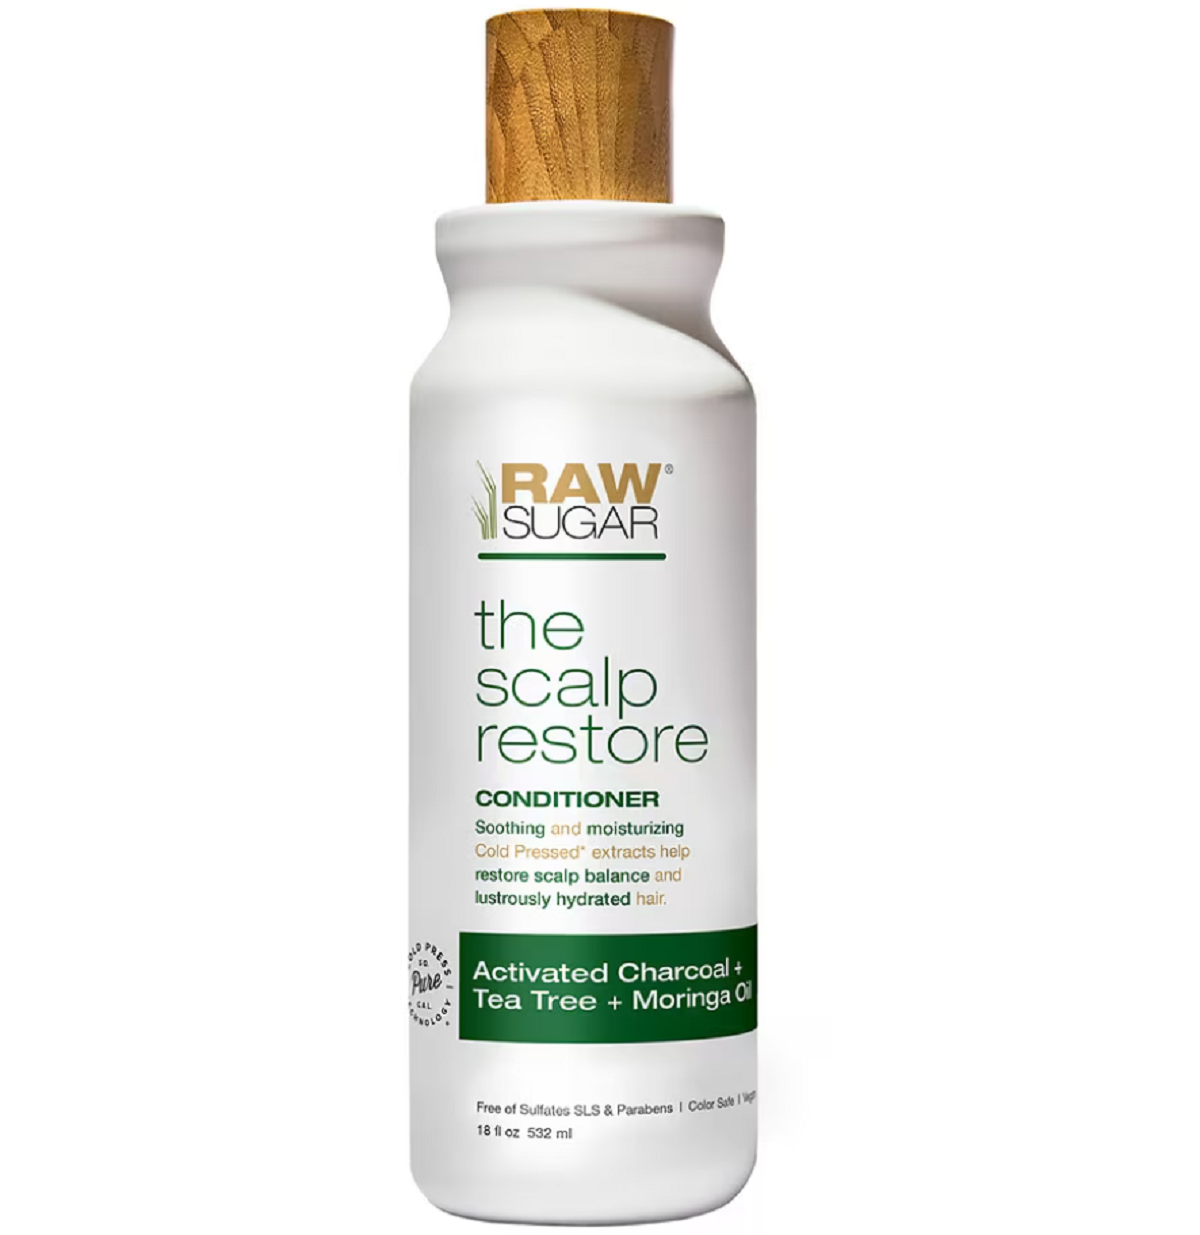 The Scalp Restore Conditioner Activated Charcoal + Tea Tree + Moringa Oil, Raw Sugar Hair Care Products coupon